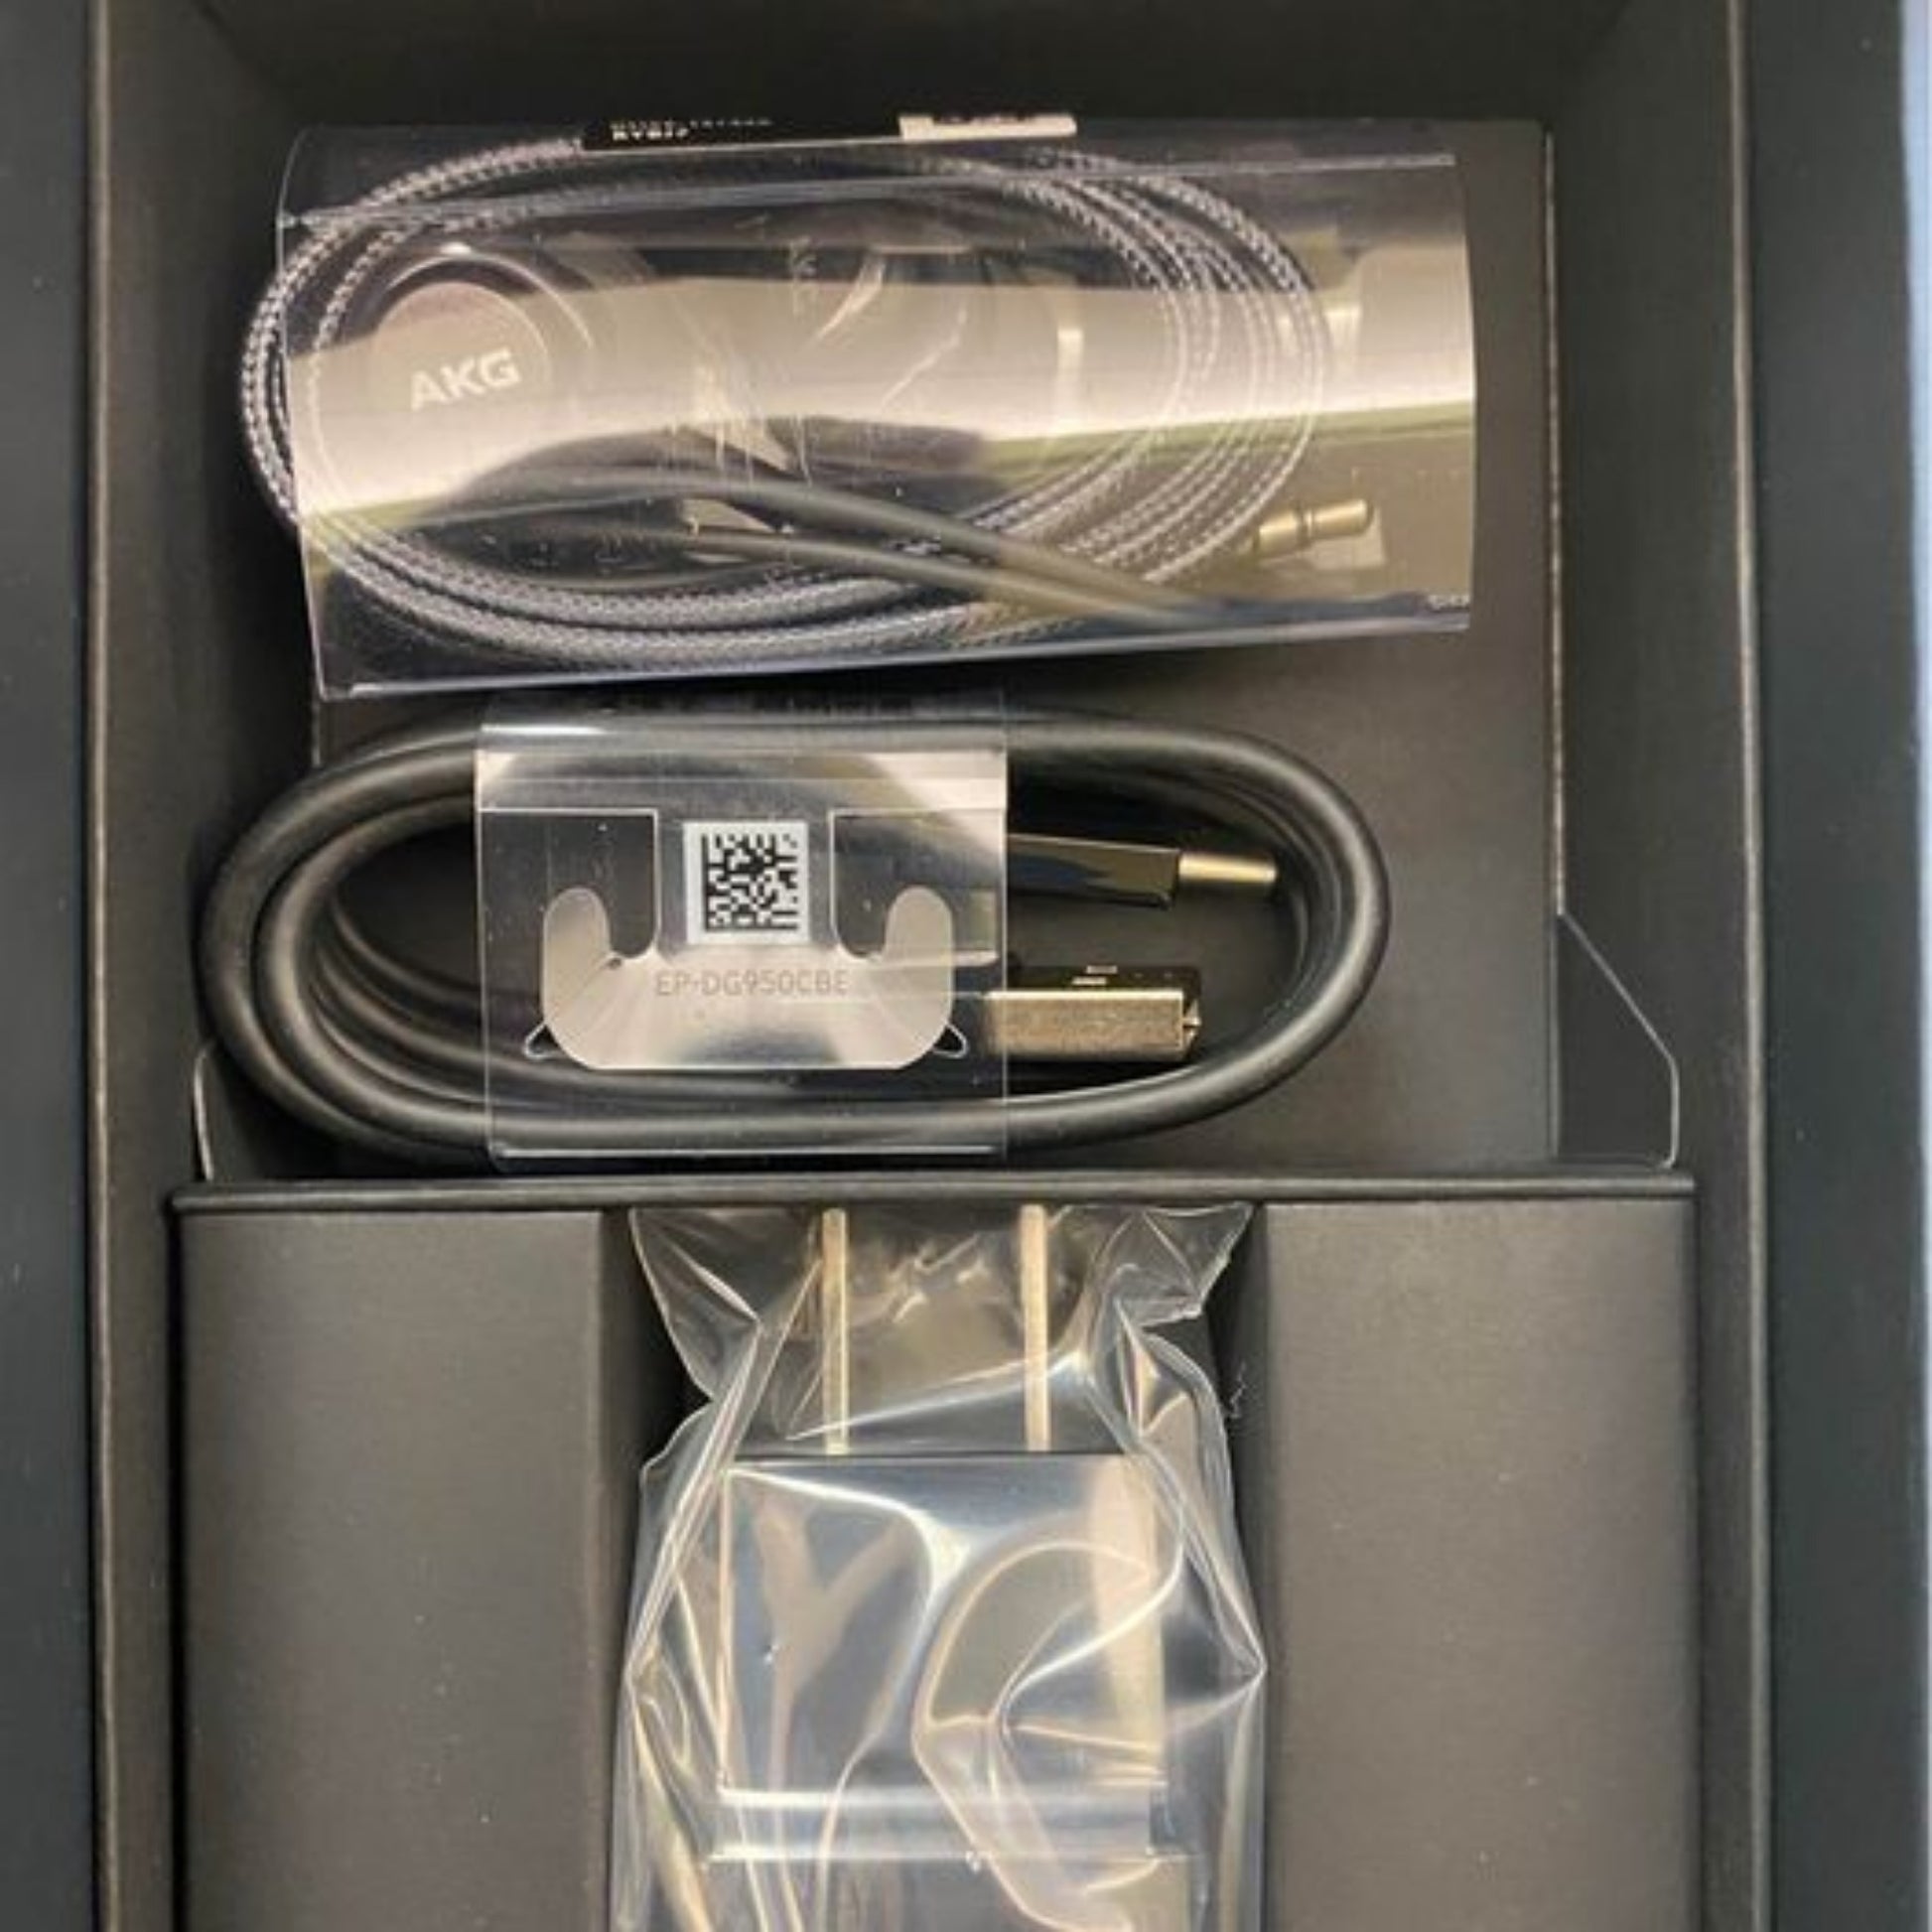 Samsung Galaxy Note 9 charger, earbuds and adapter pre-packaged